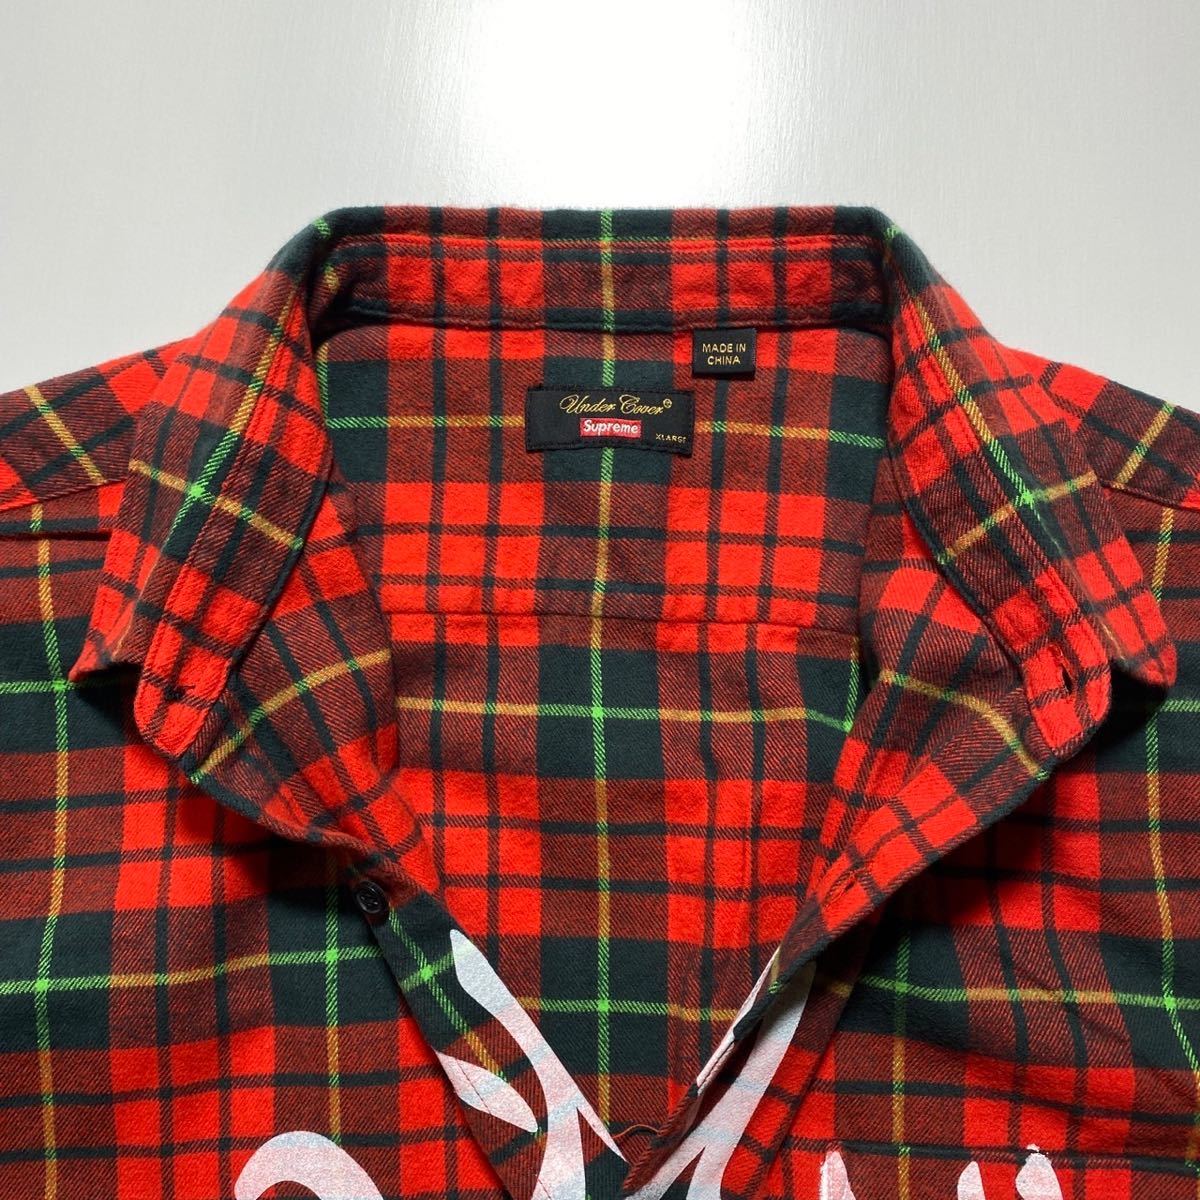 XL】新品 supreme UNDERCOVER S/S Flannel Shirt Red Plaid